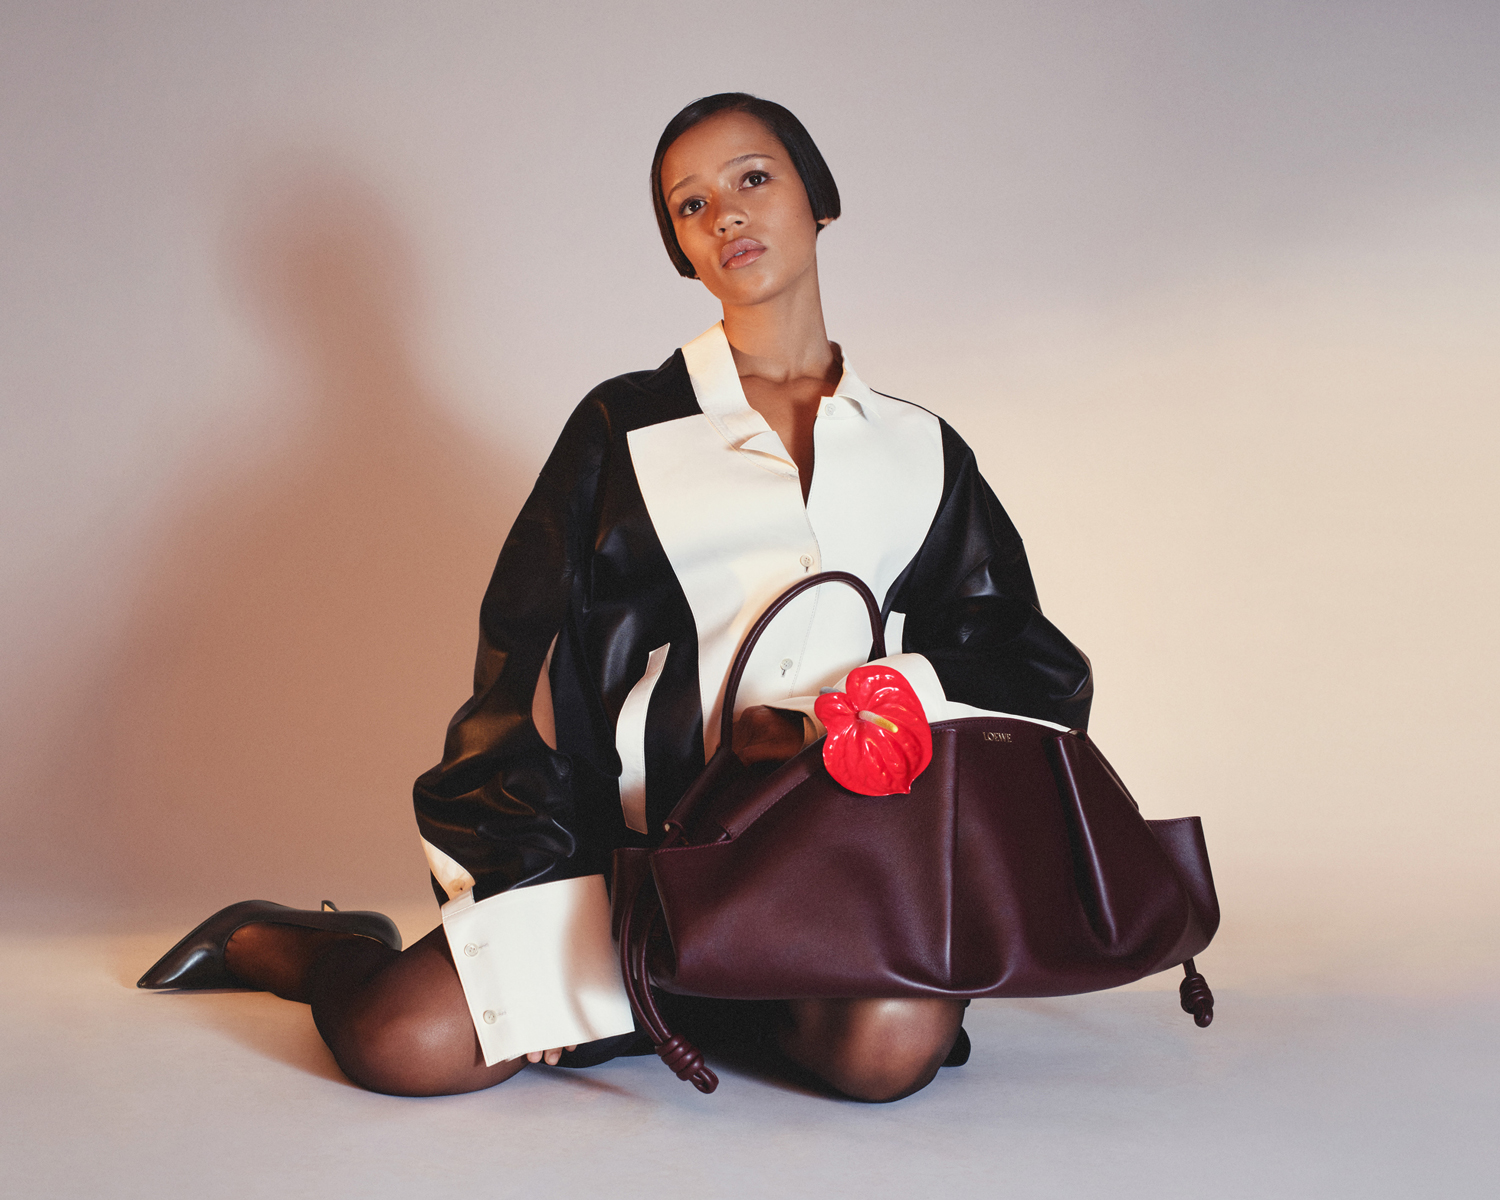 Could Loewe's Paseo Be the Next “It” Bag?